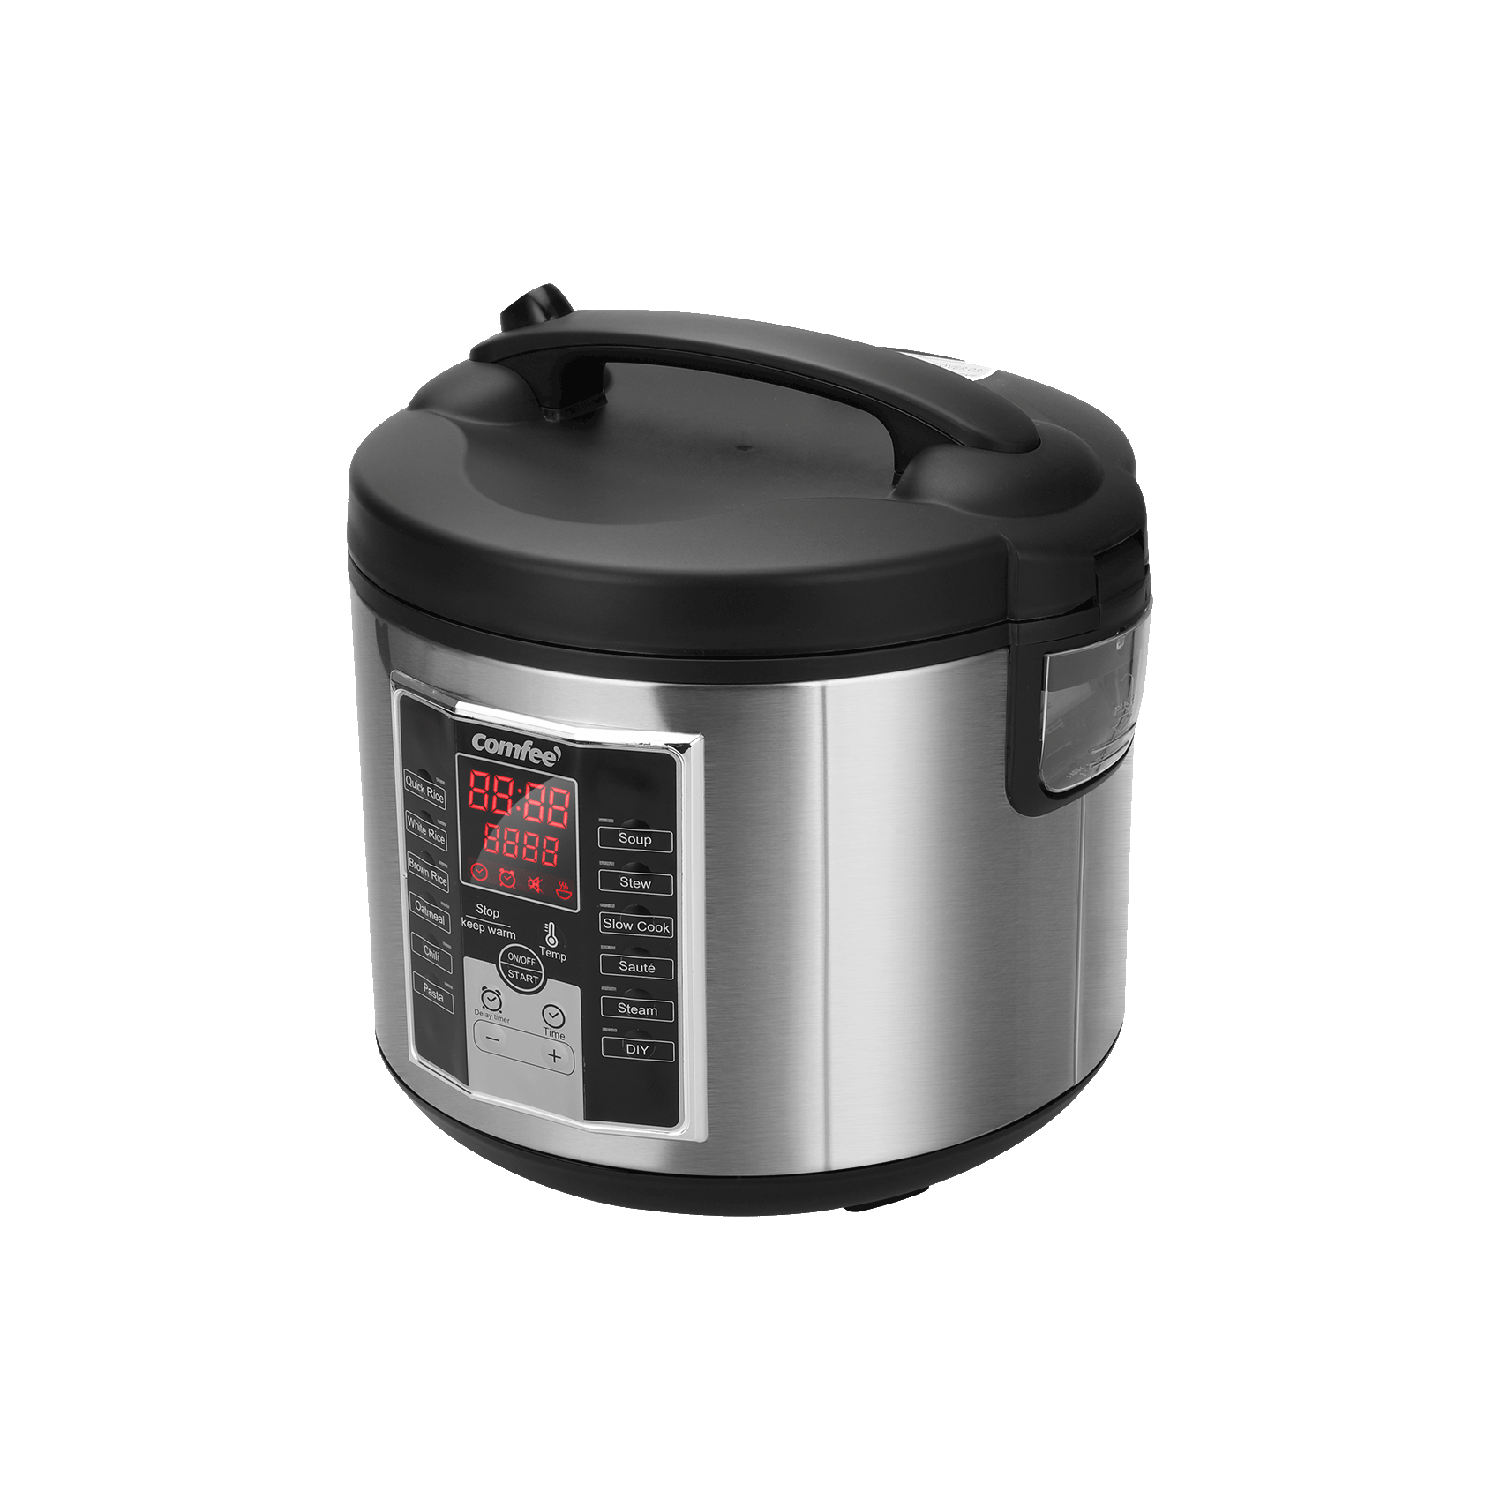 COMFEE' Rice Cooker, 8-in-1 Stainless Steel Multi Cooker, Slow